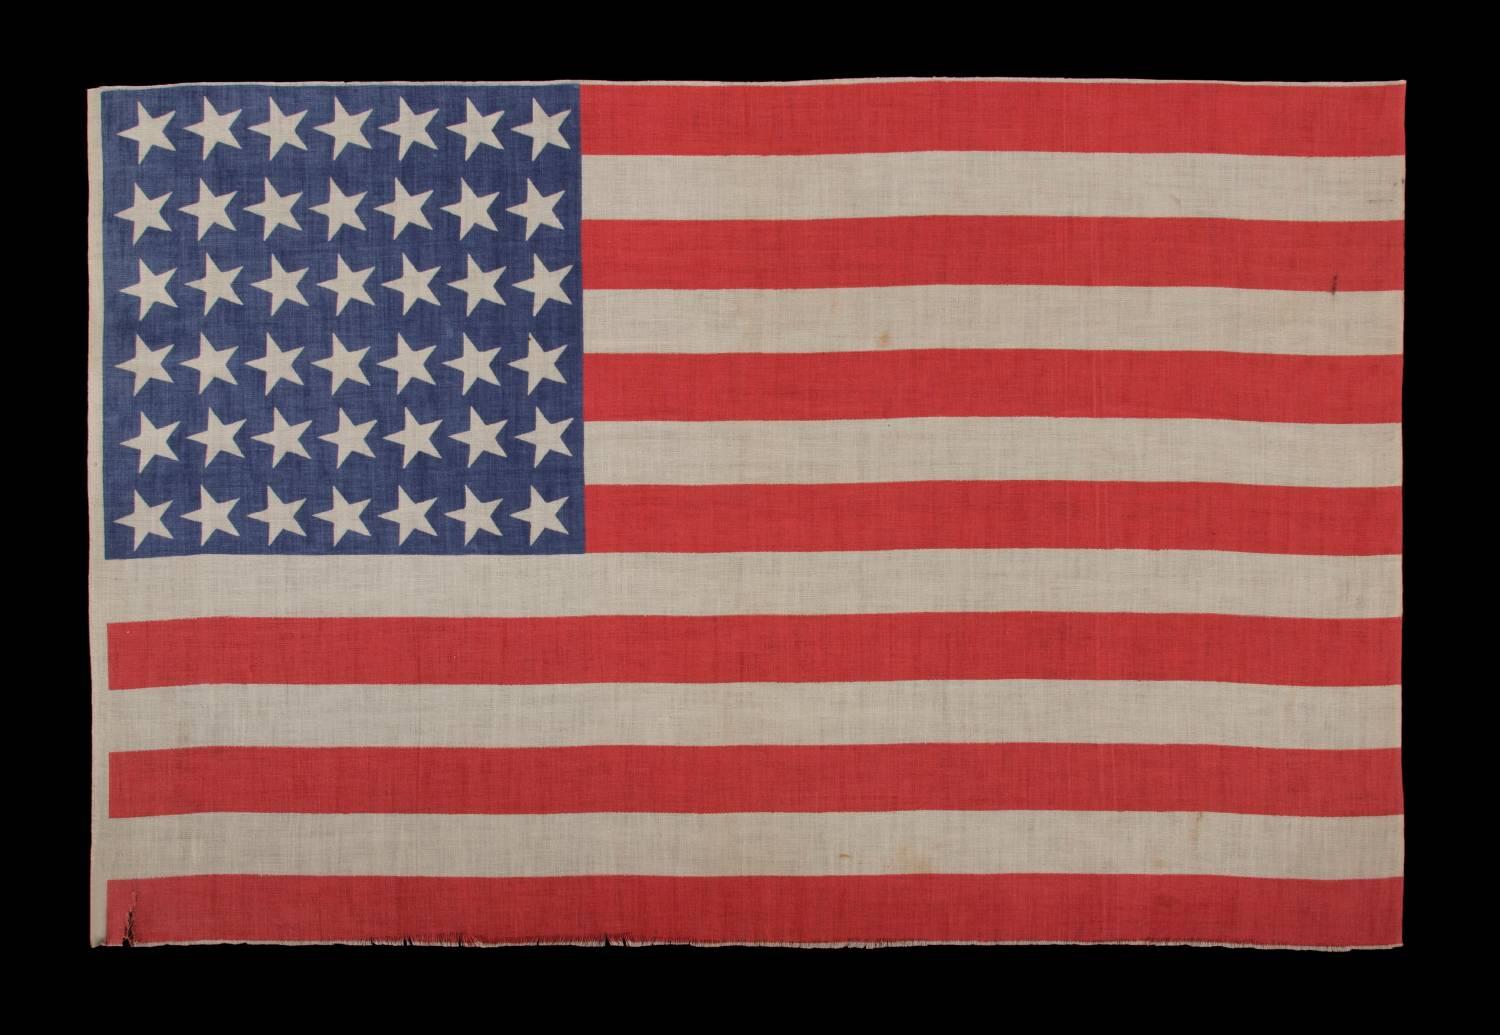 42 canted stars, never an official star count, 1889-1890, Washington statehood:

 42 star American parade flag, printed on cotton. Note how the stars, which are arranged in a rectilinear fashion, are canted at a uniform angle in the 11:00